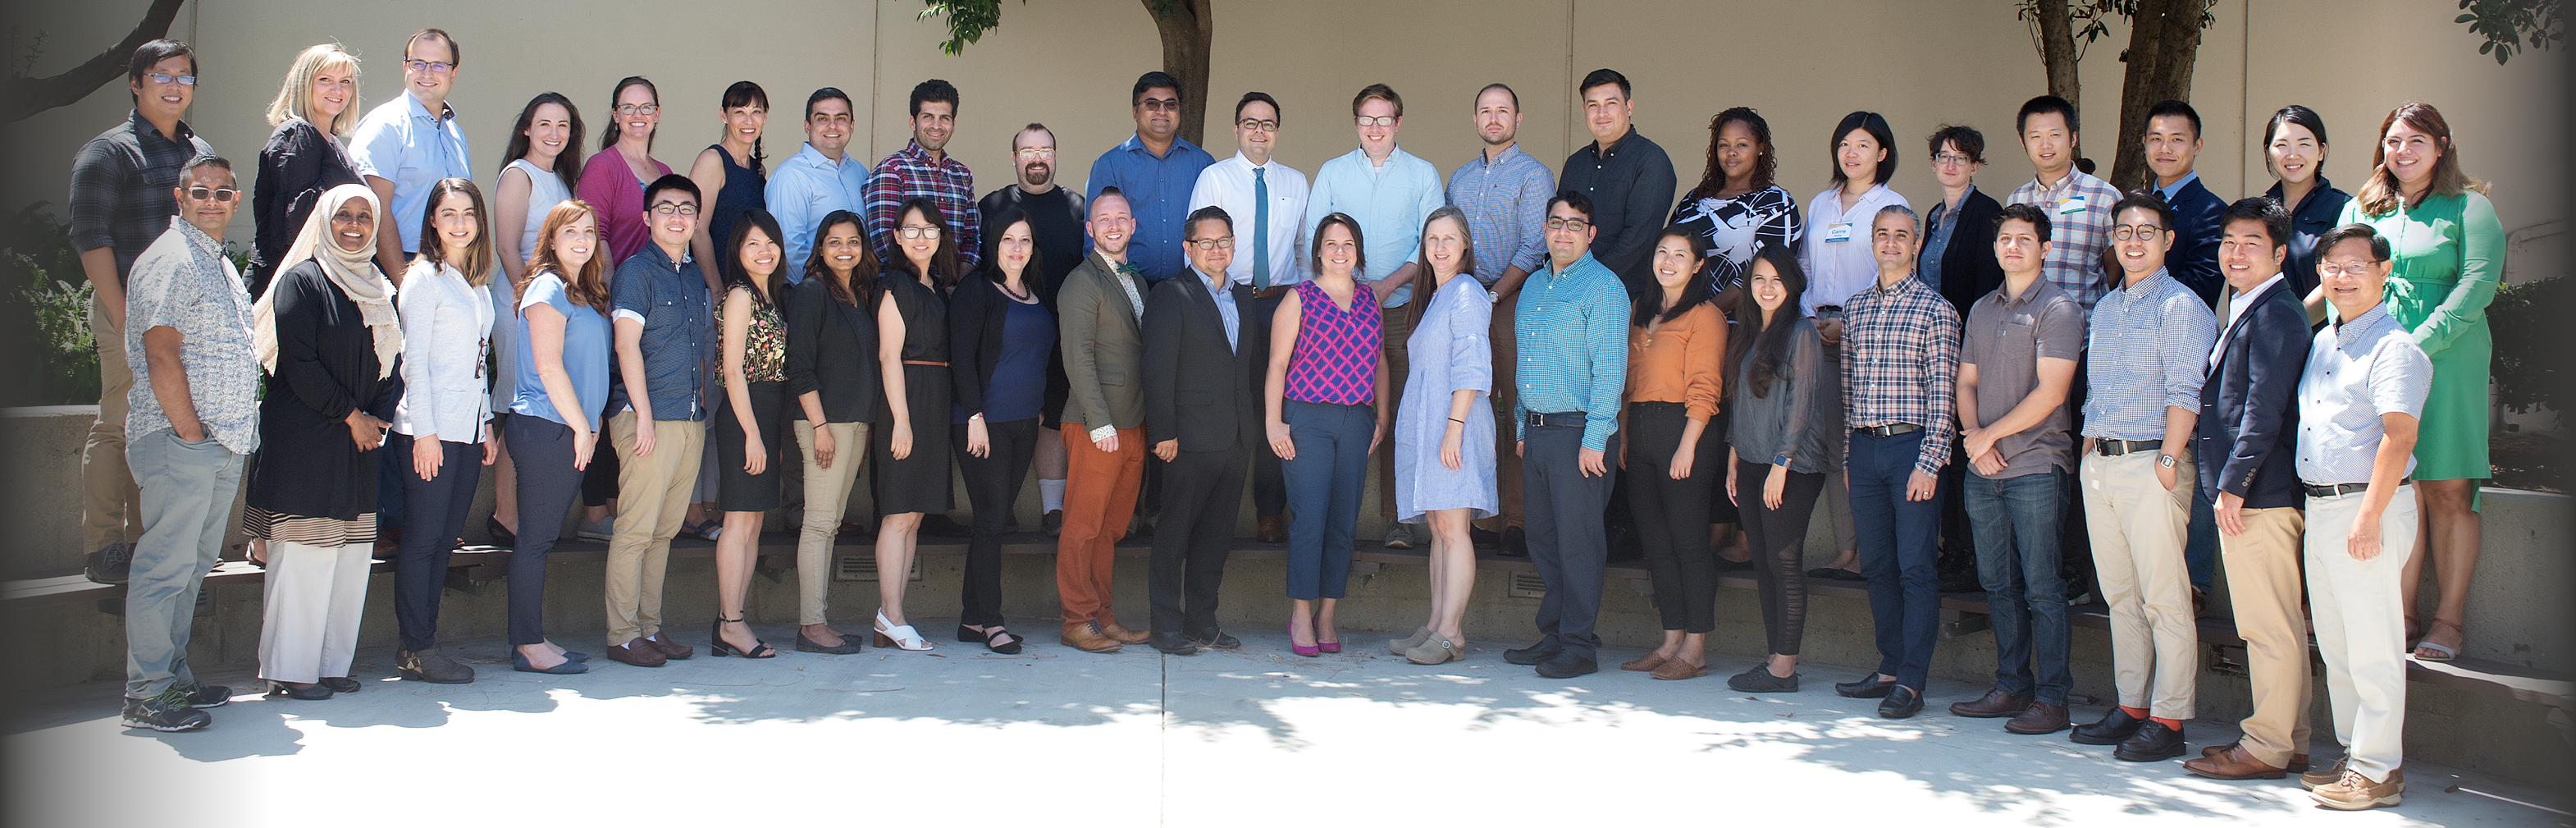 The 2019 new faculty